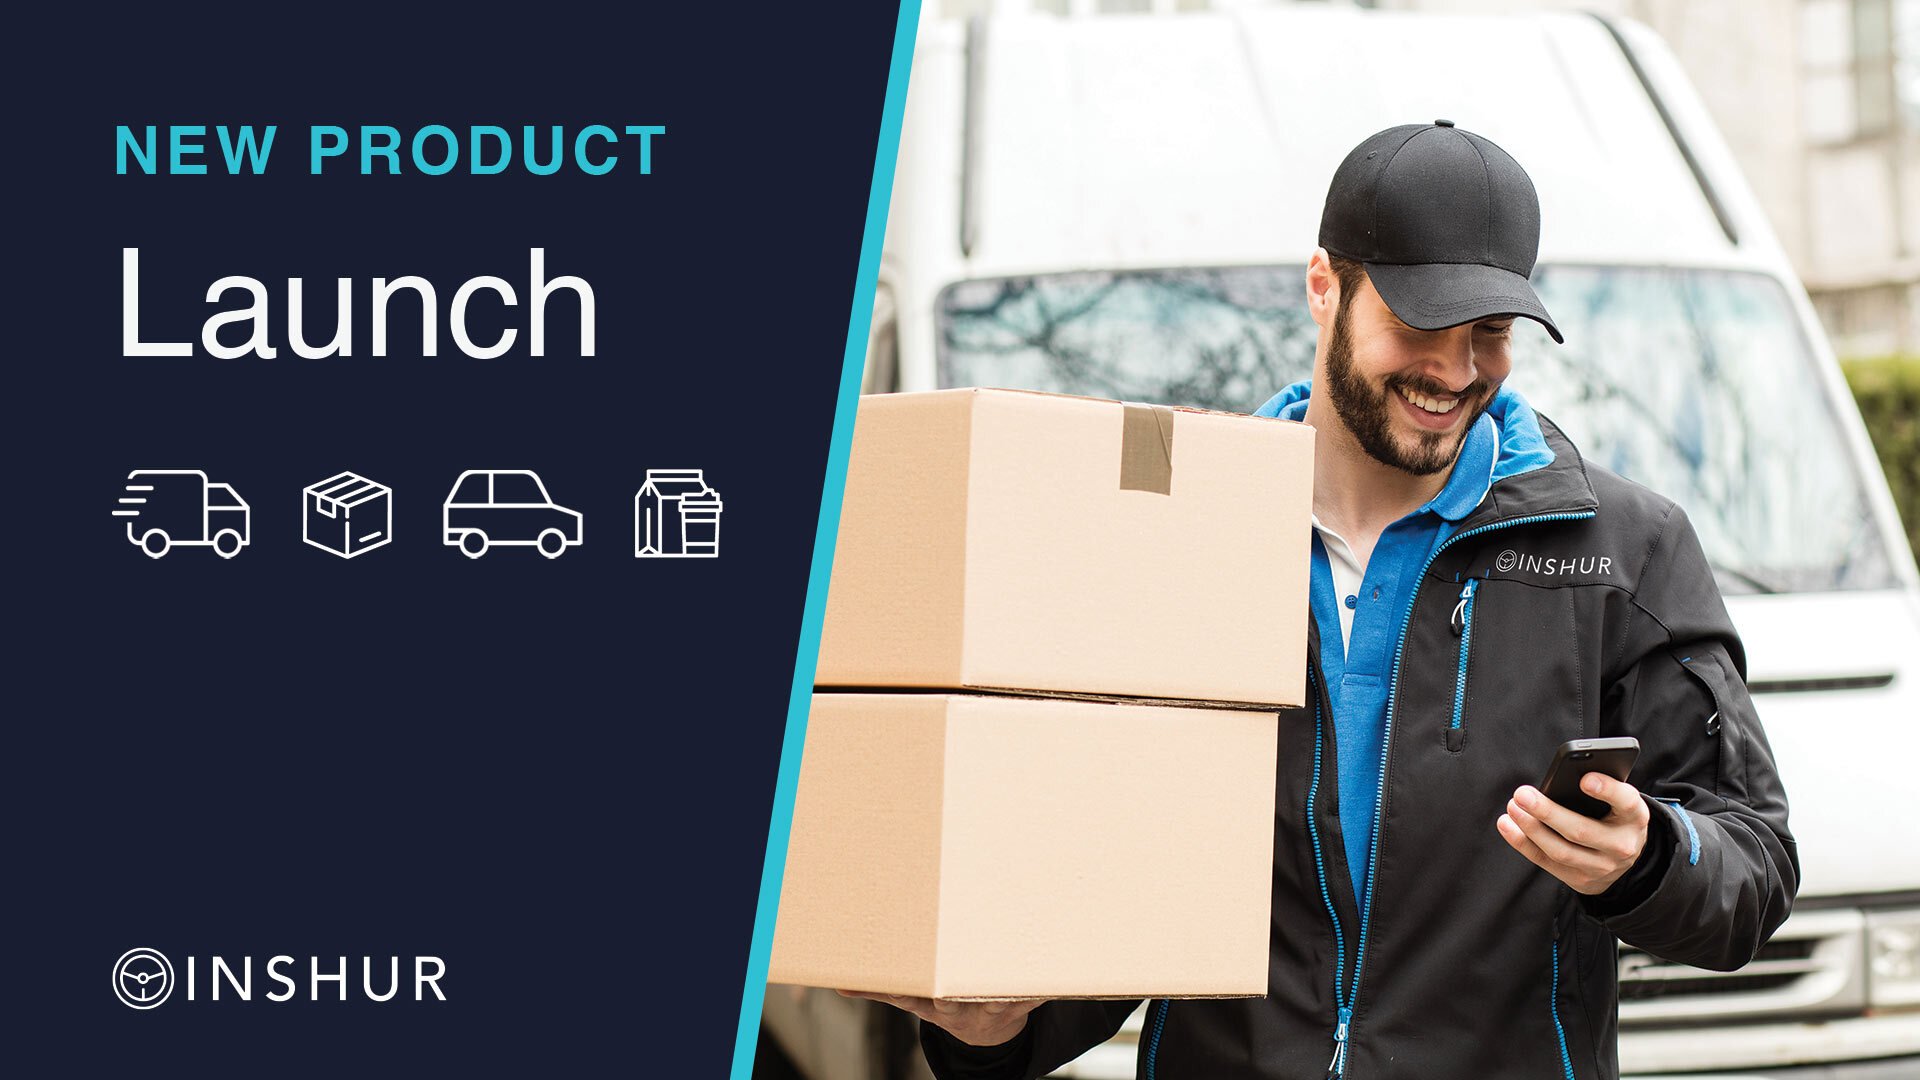 INSHUR offers insurance in minutes for couriers and food delivery drivers